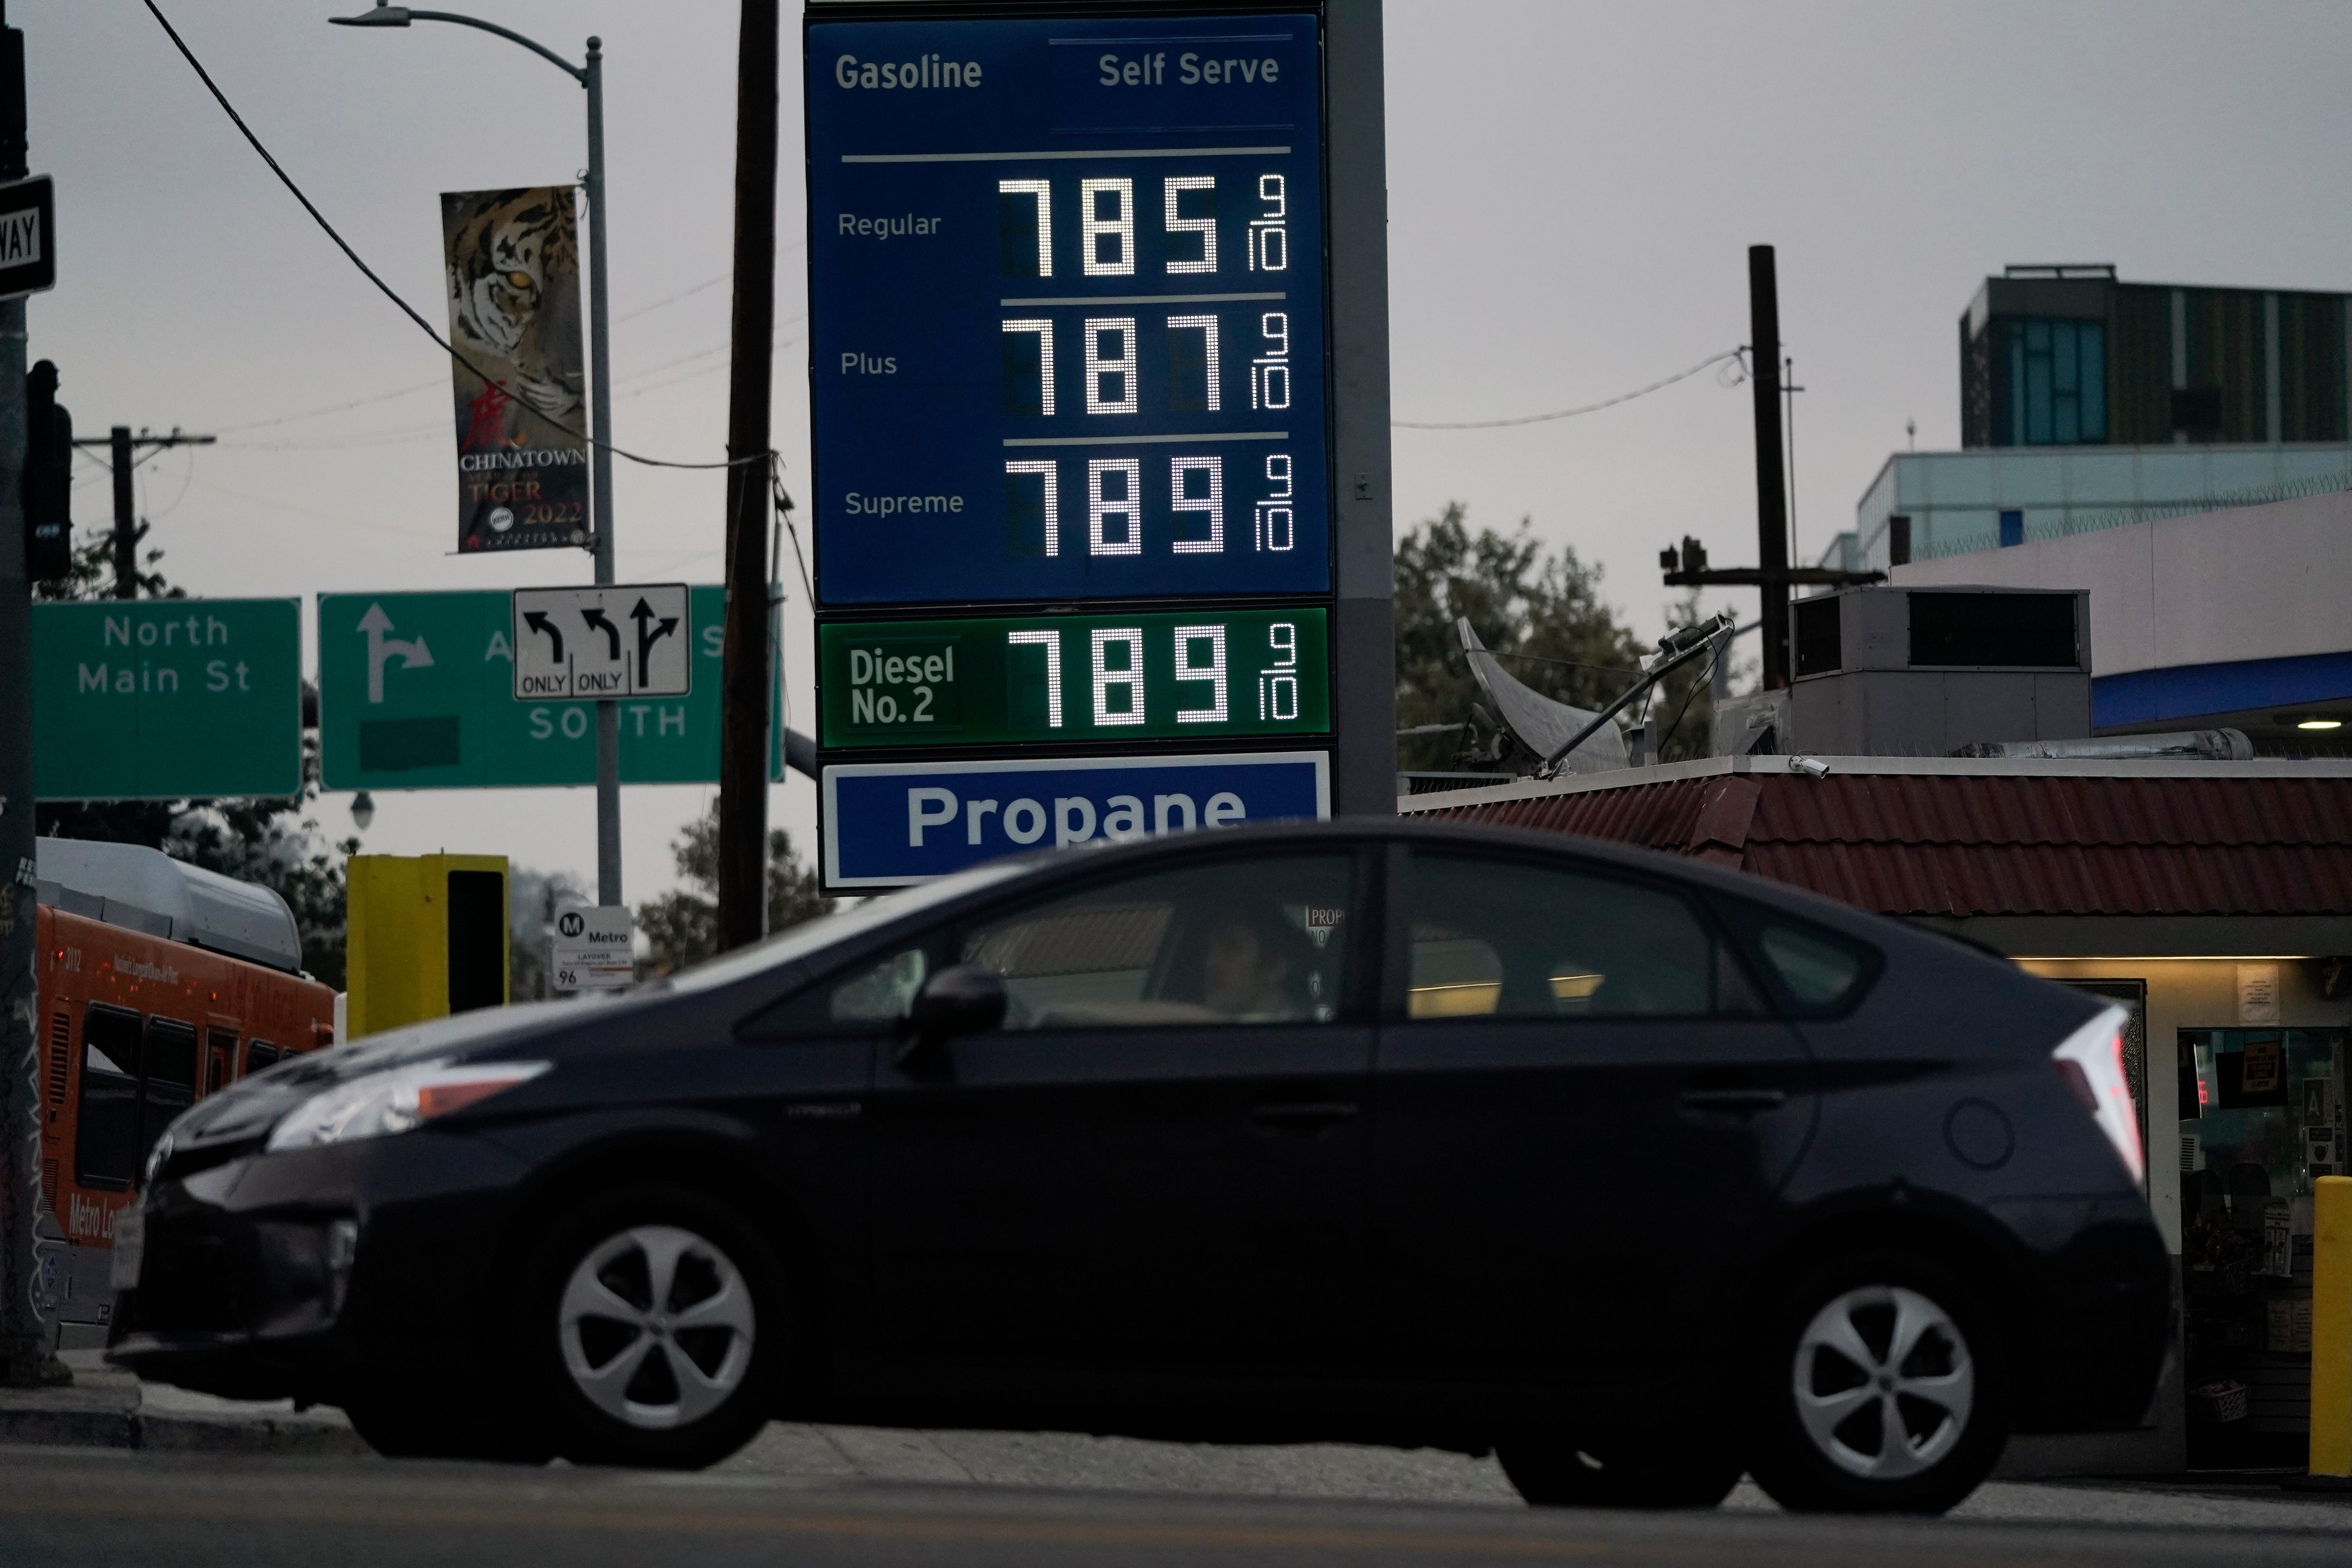 California gas prices are soaring again, averaging $6.42 a gallon. But 'welcome relief' is coming.